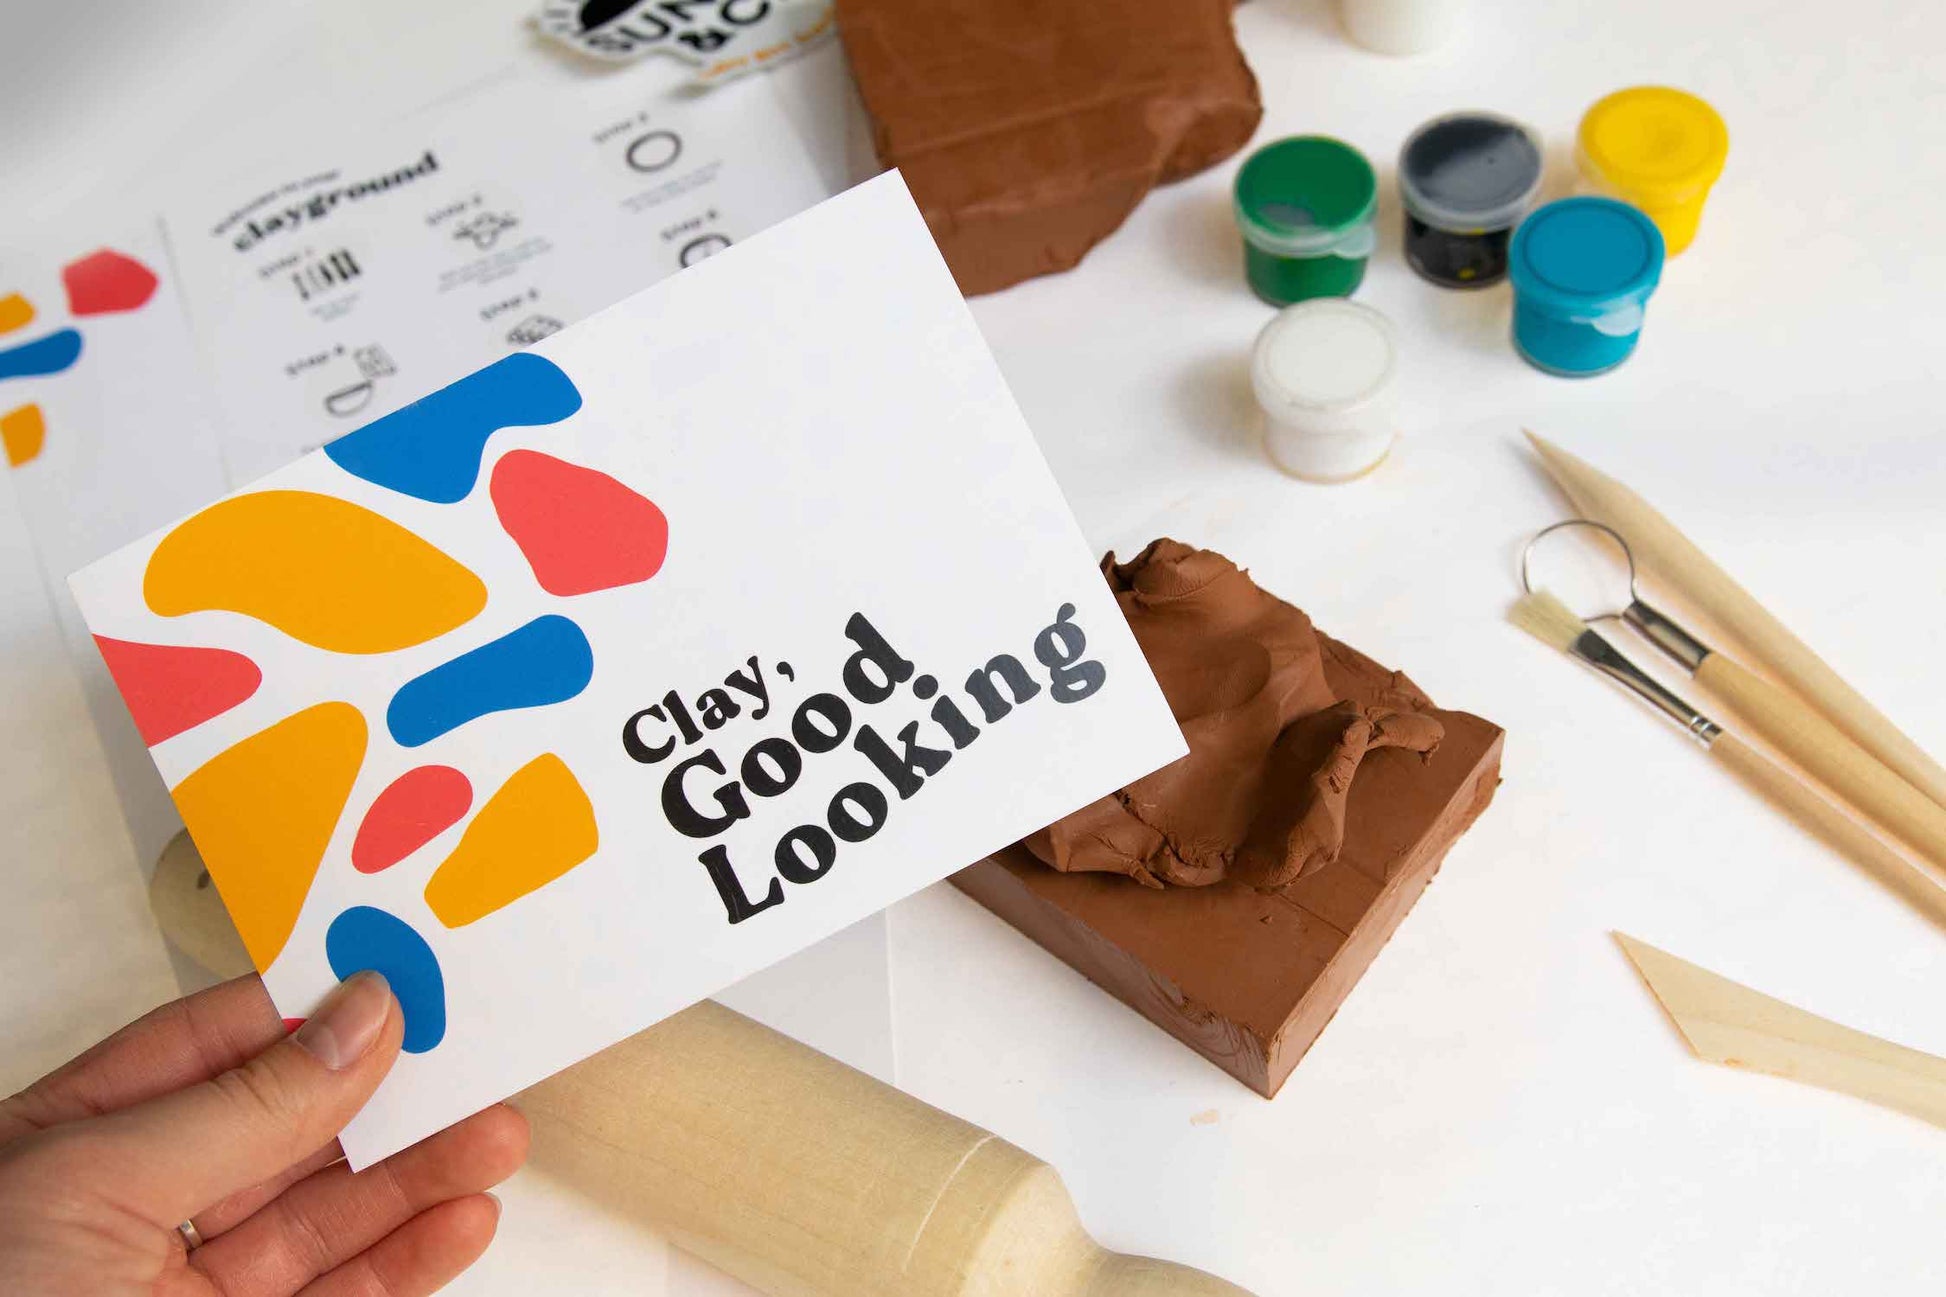 Come clay with us! All the clay adventures to be had with our DIY air dry clay kit.